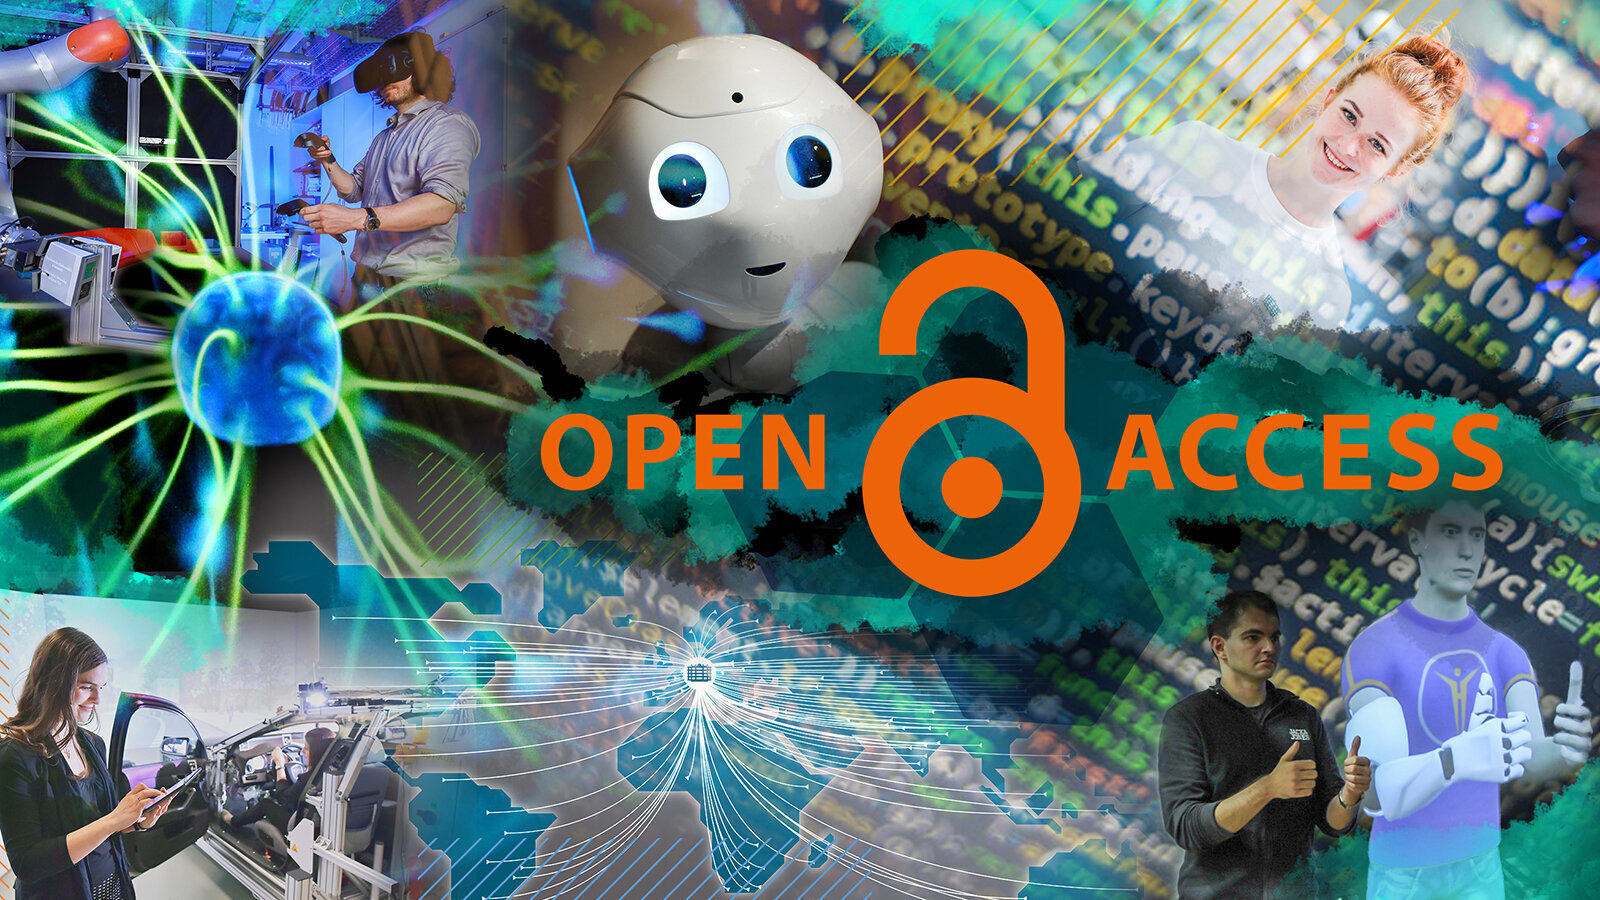 Photo montage of several images with text about open science.